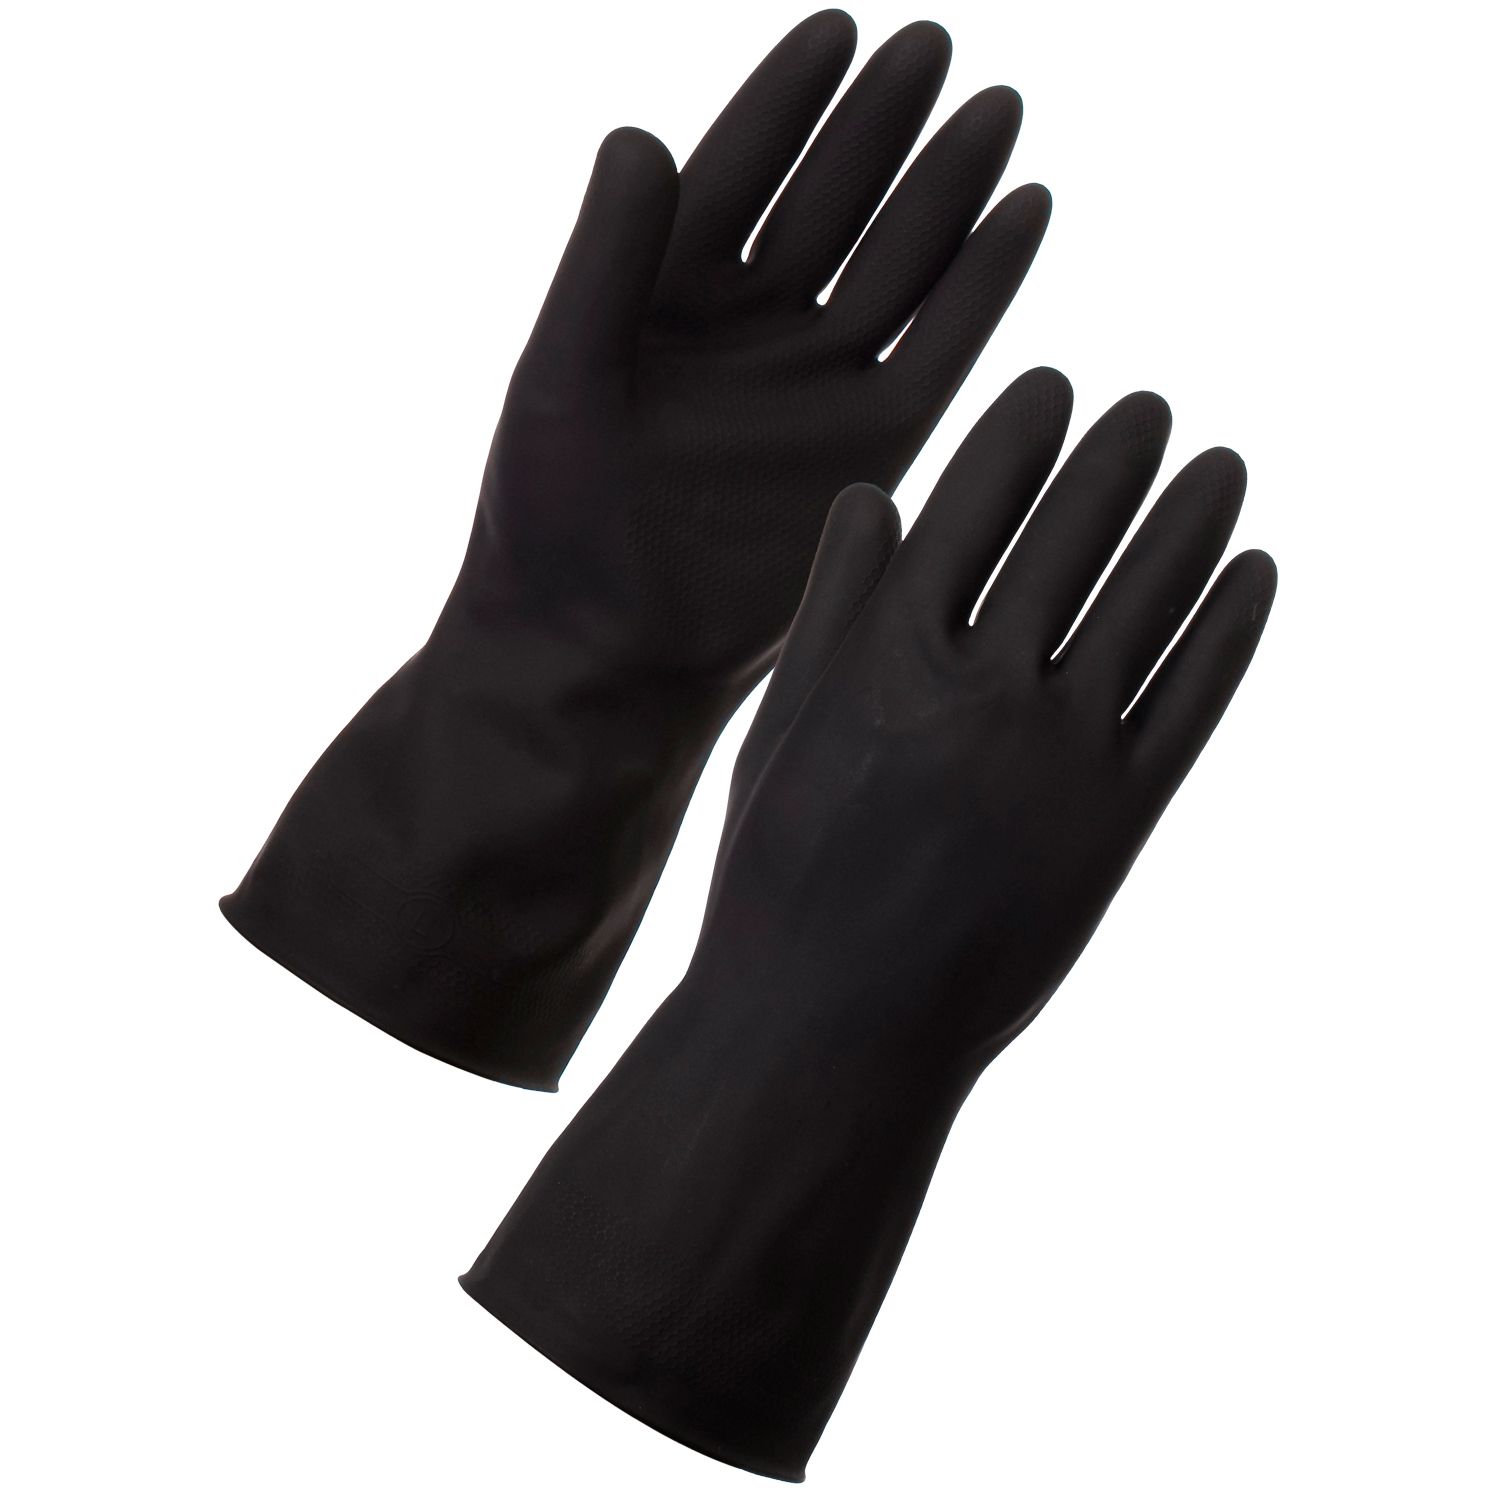 Heavyweight Chemical Resistant Latex Gloves with EN388 